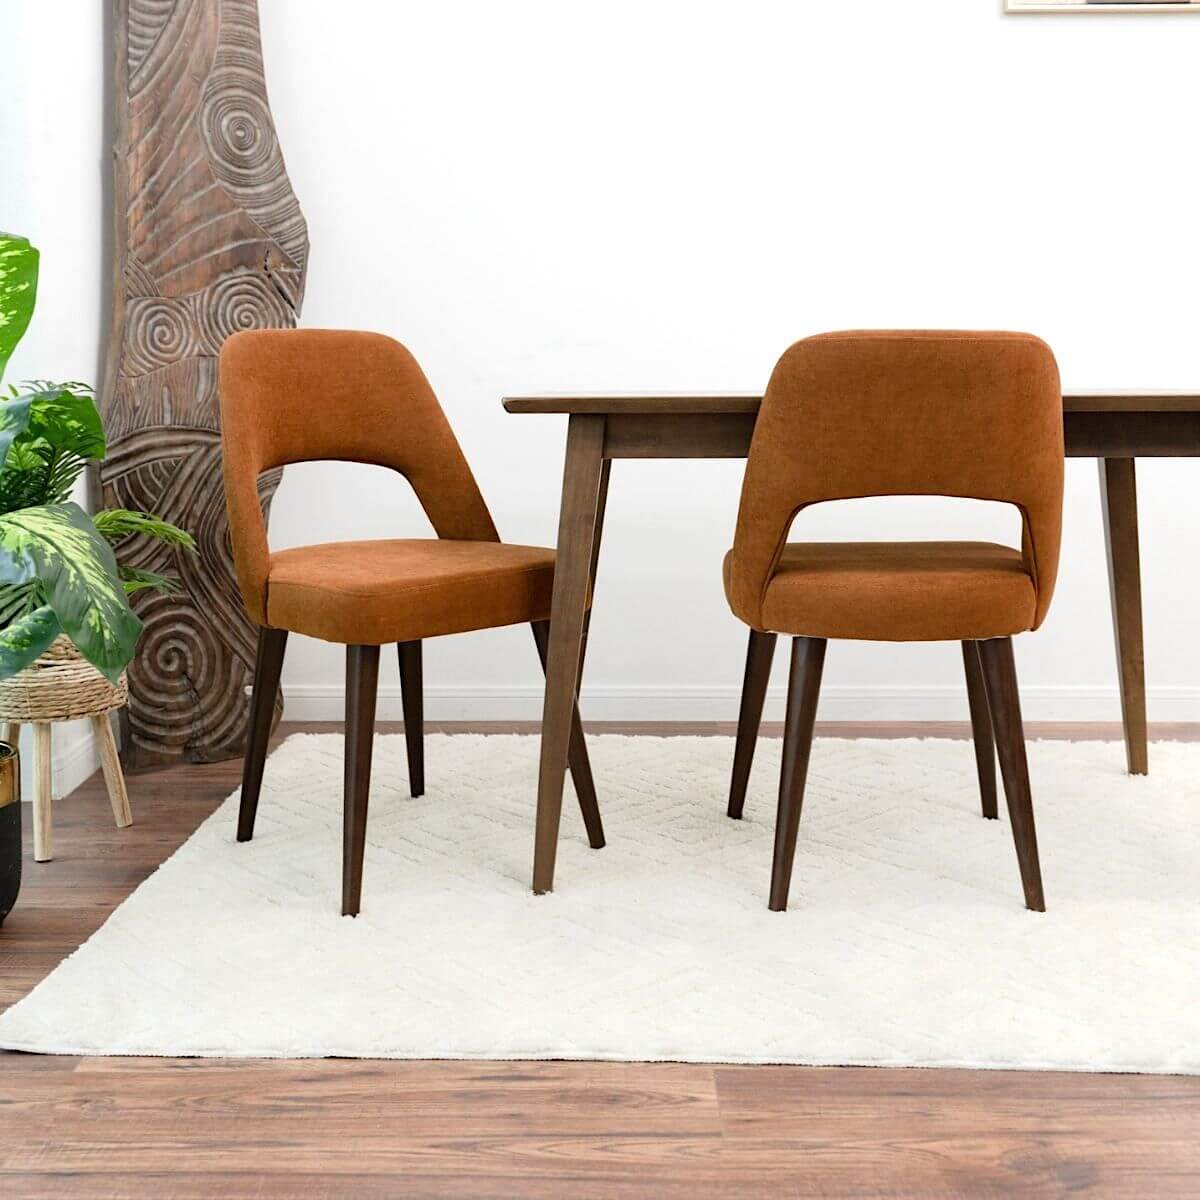 Juliana Mid Century Modern Upholstered Dining Chair (Set of 2) Polyester / Yellow